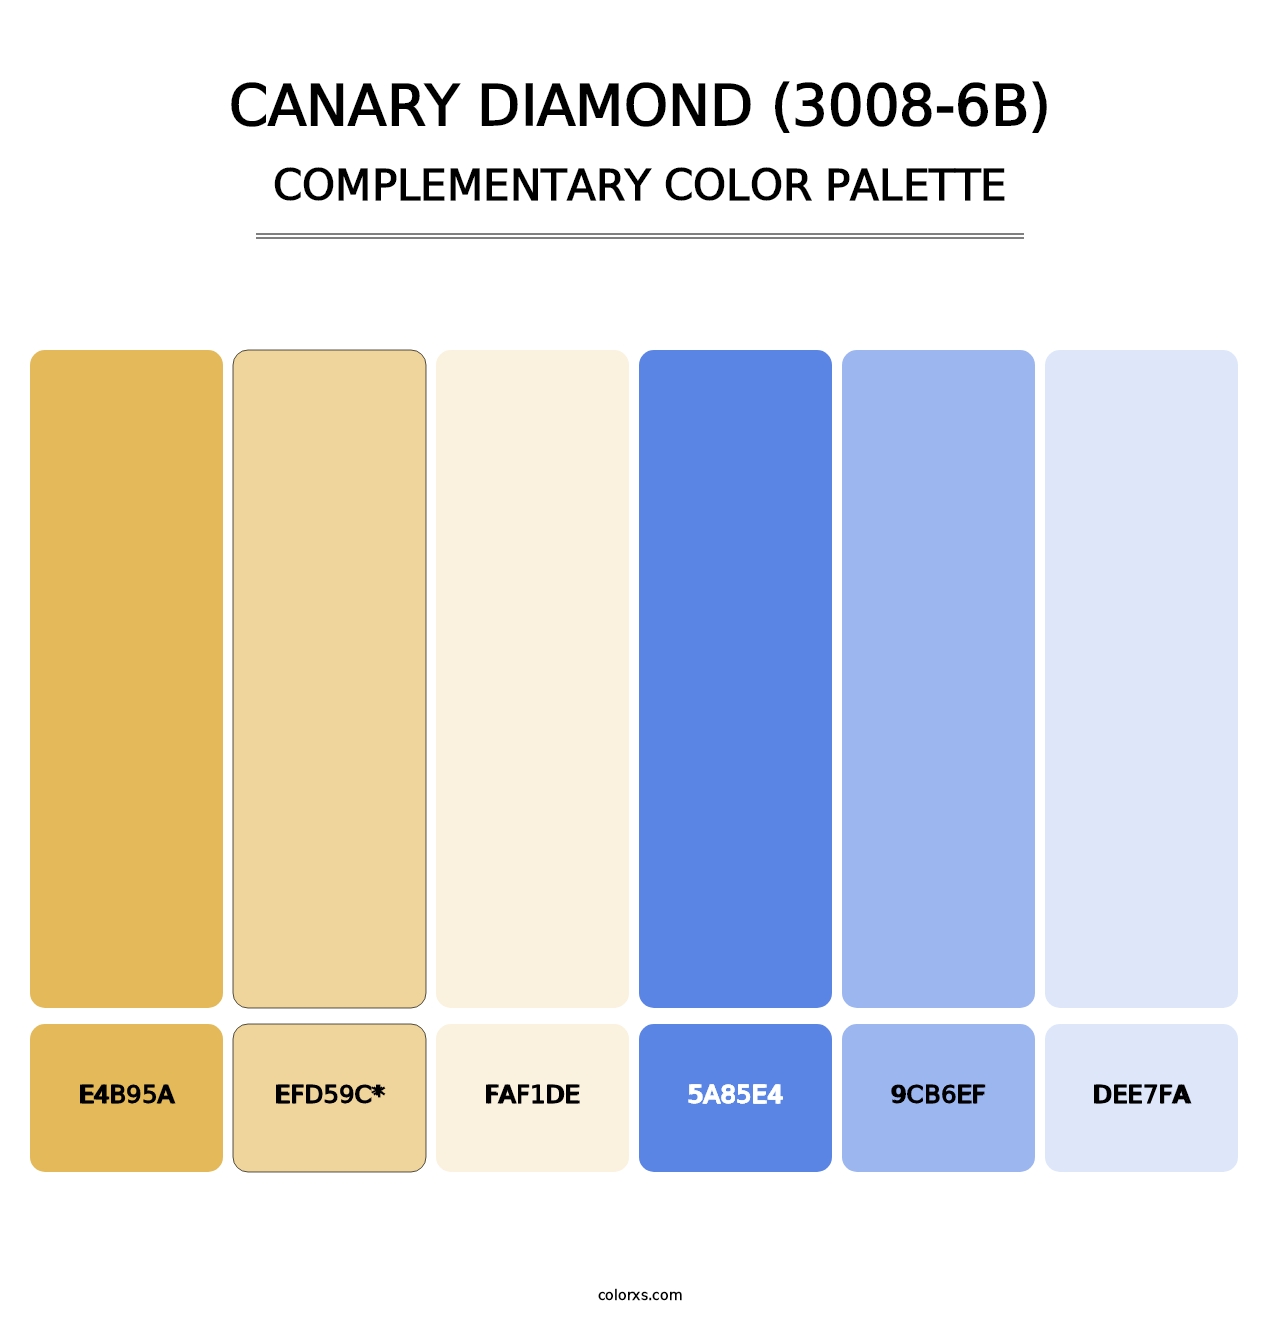 Canary Diamond (3008-6B) - Complementary Color Palette